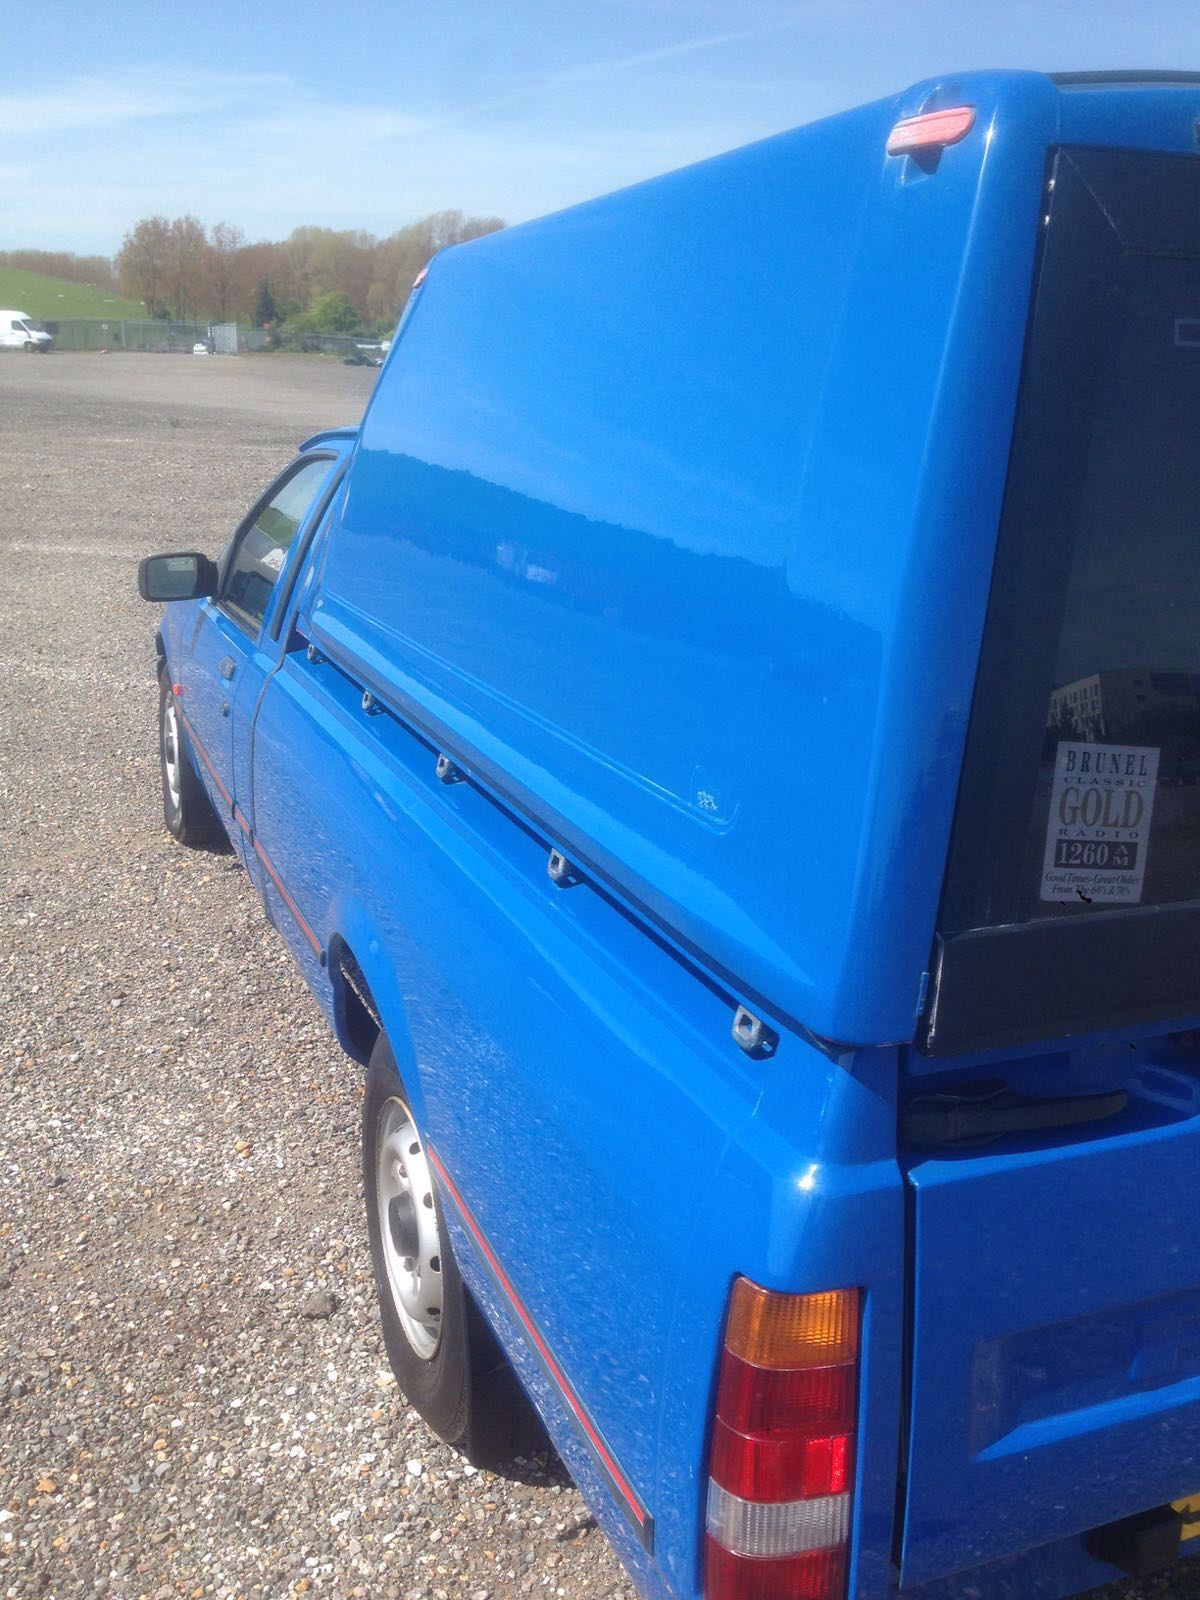 Ford P100 pickup, 1.8 turbo diesel 1991/J 39,000 miles with truckman top - Image 8 of 13